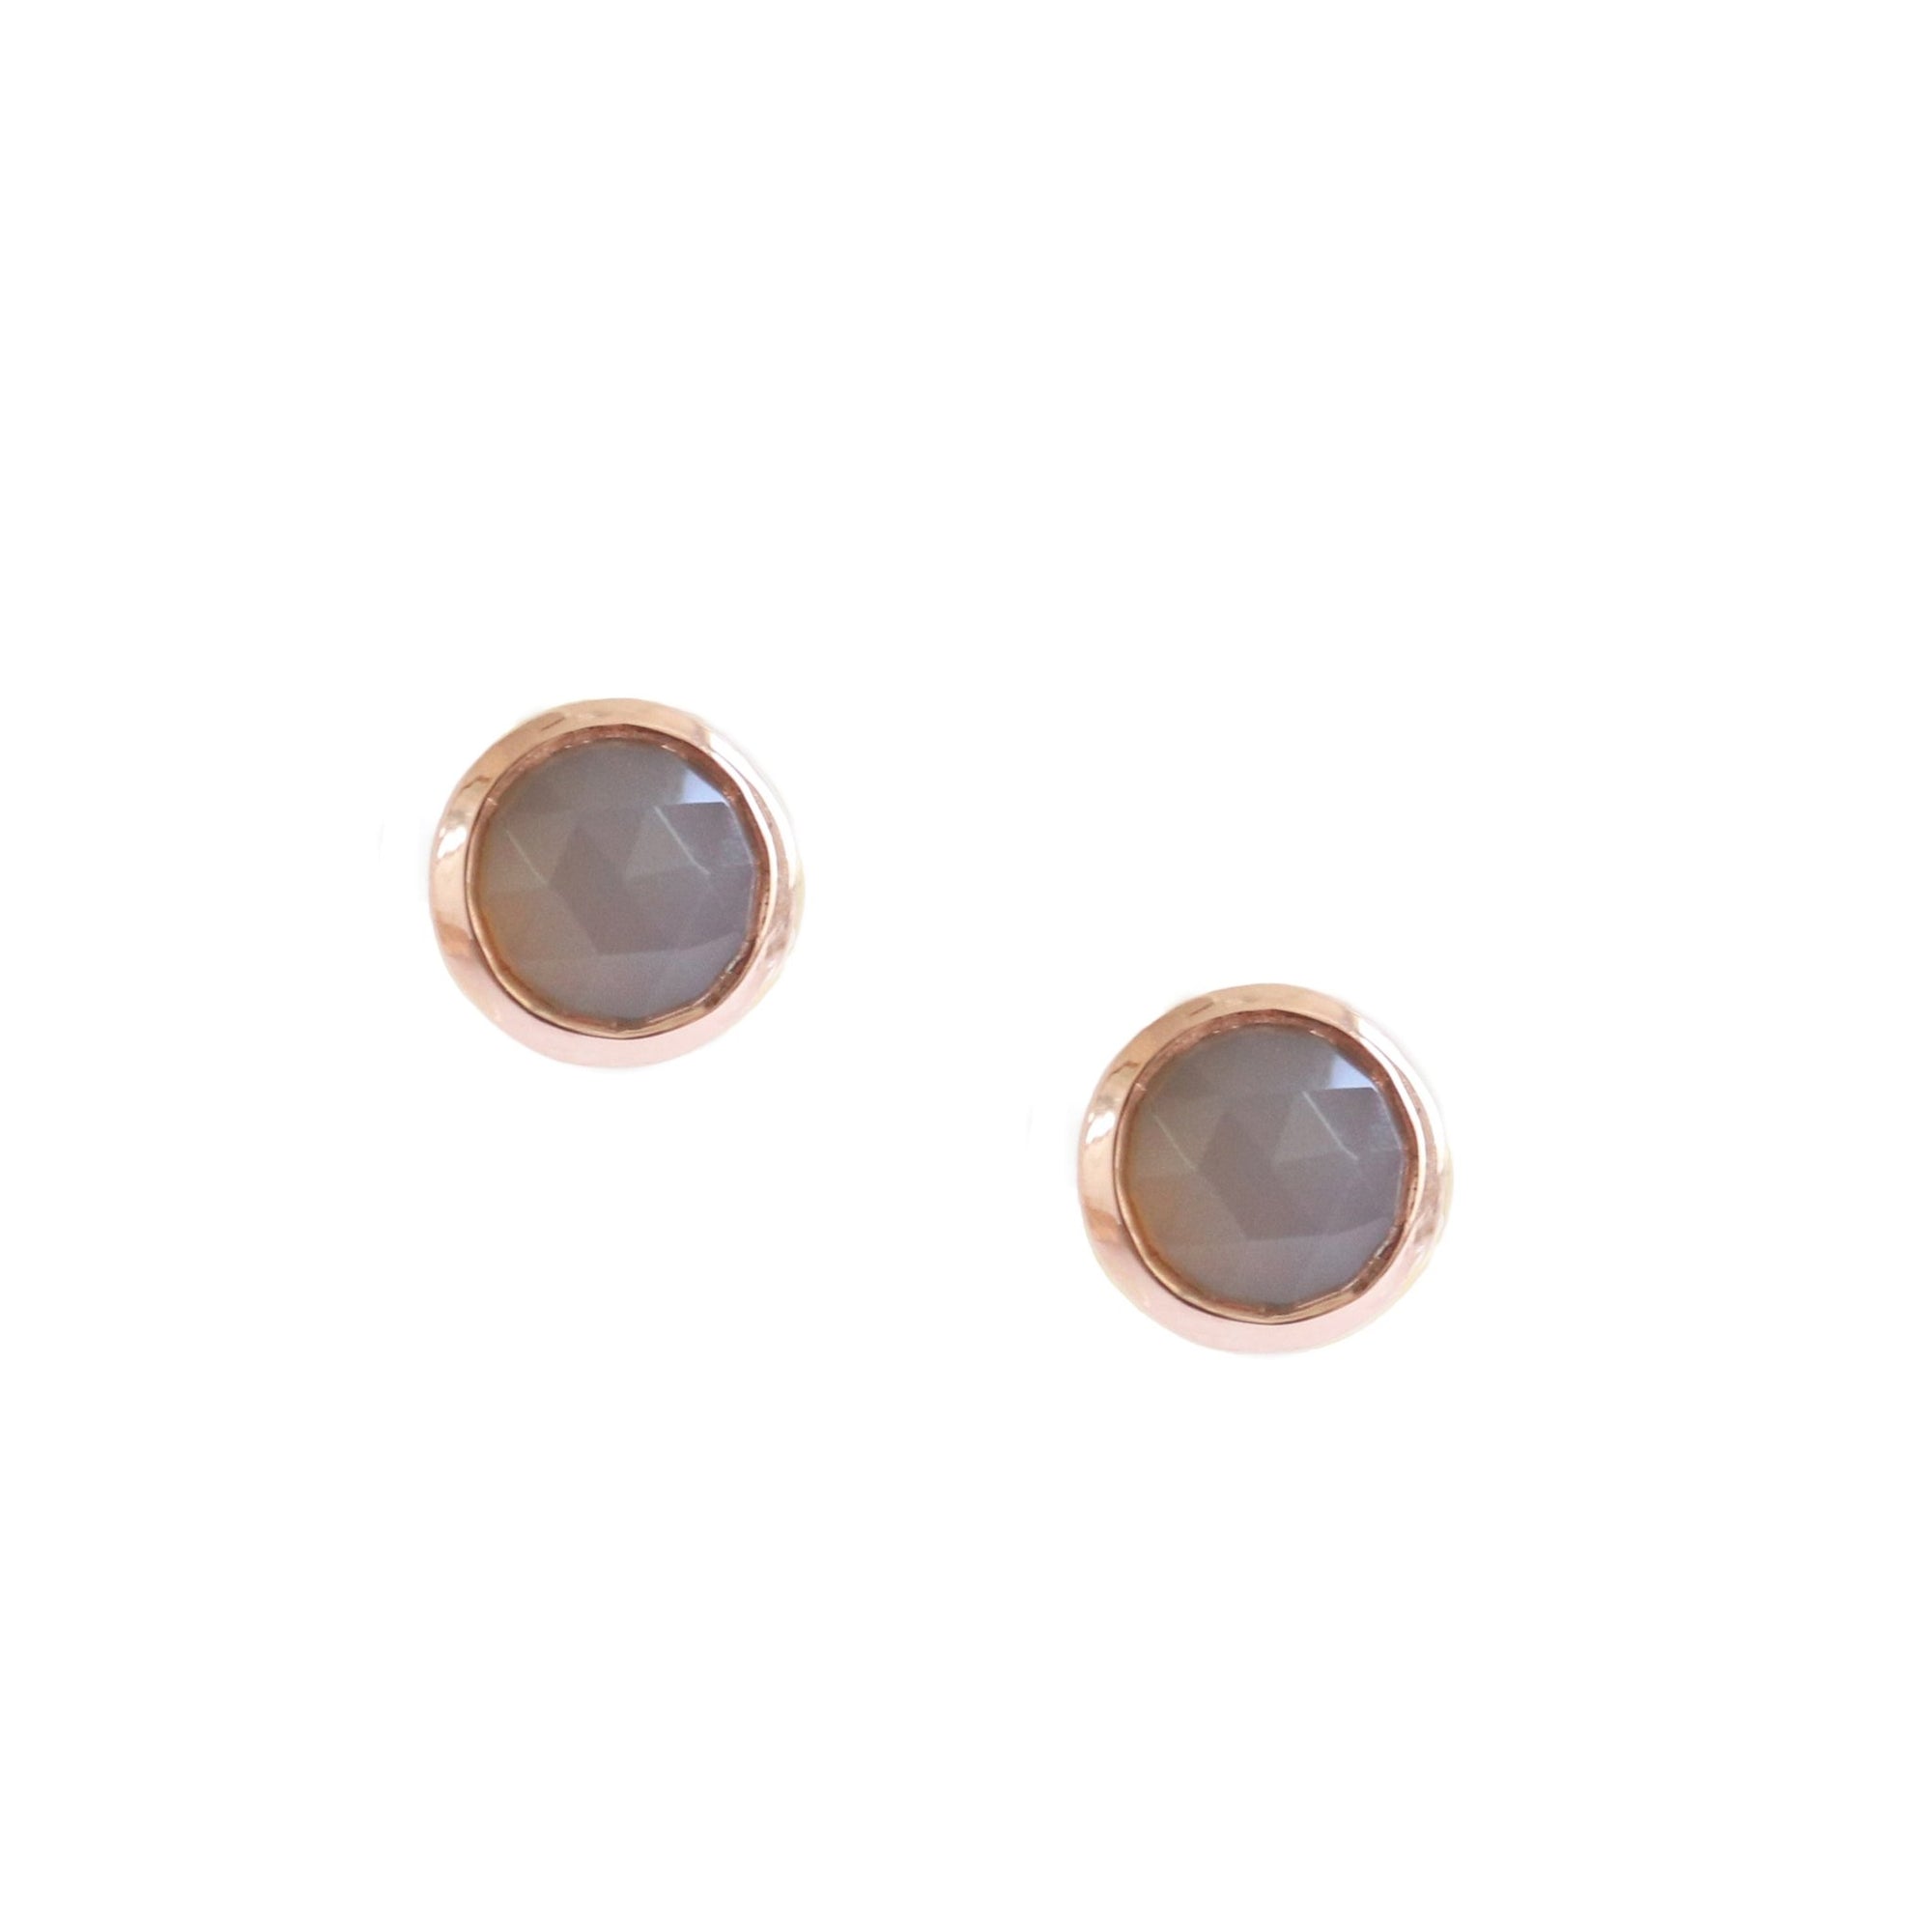 DAINTY LEGACY STUDS - GREY MOONSTONE & ROSE GOLD - SO PRETTY CARA COTTER